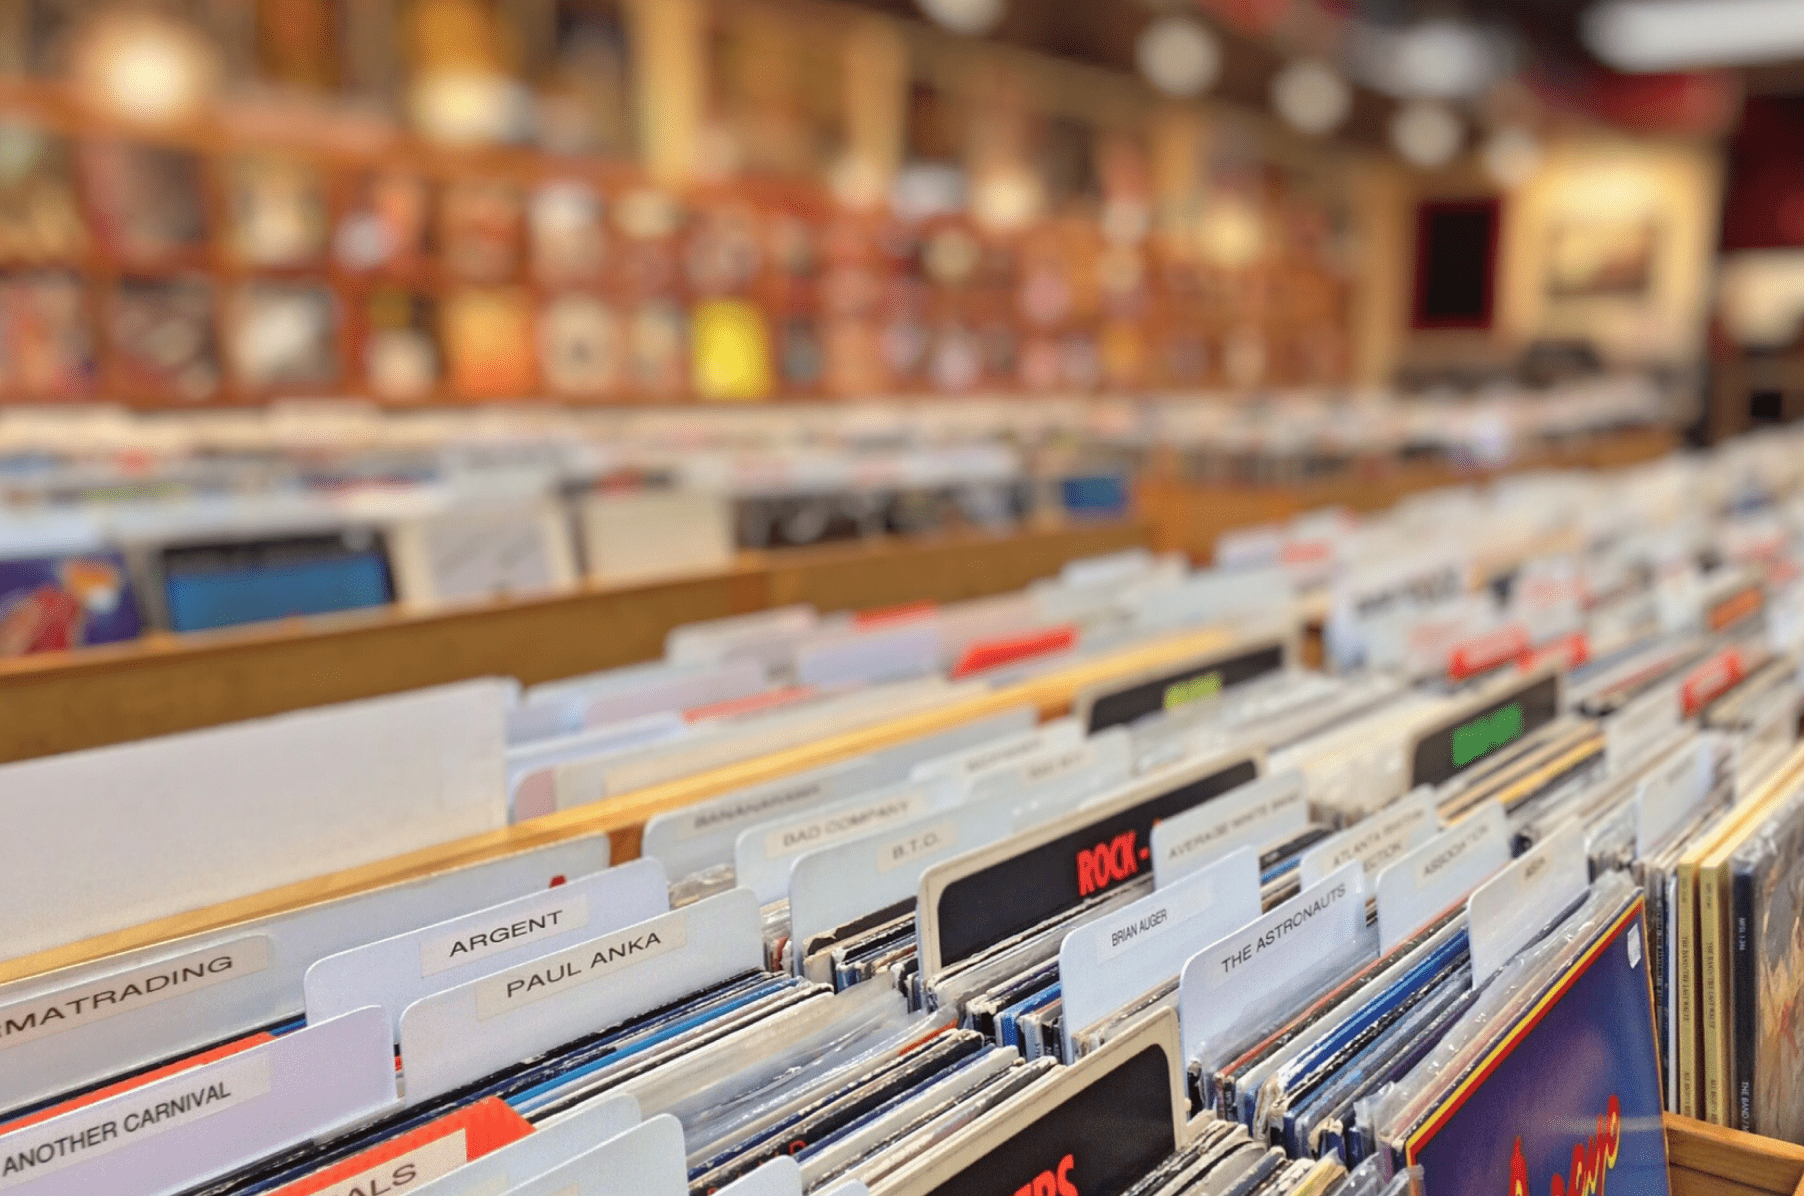 Vinyl records in a record store